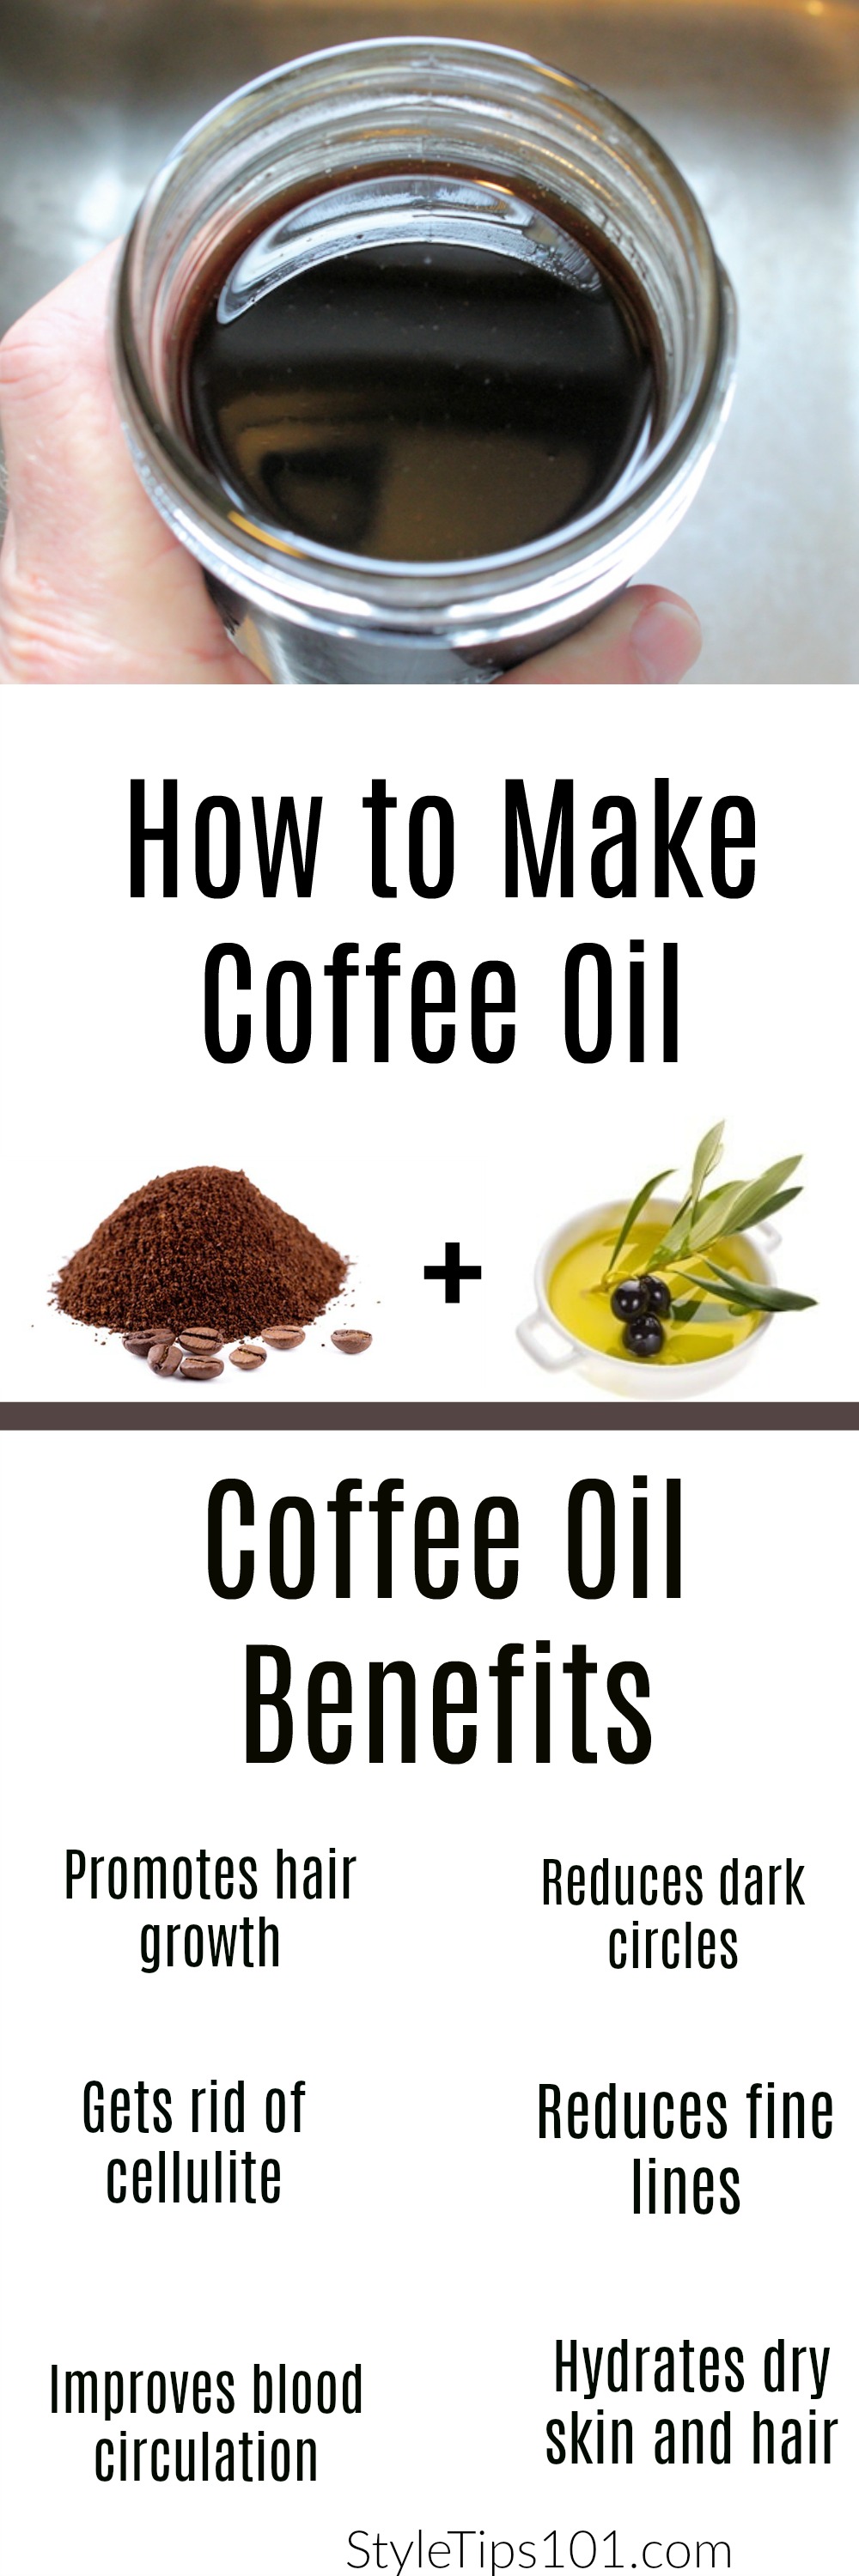 How to Make Coffee Oil